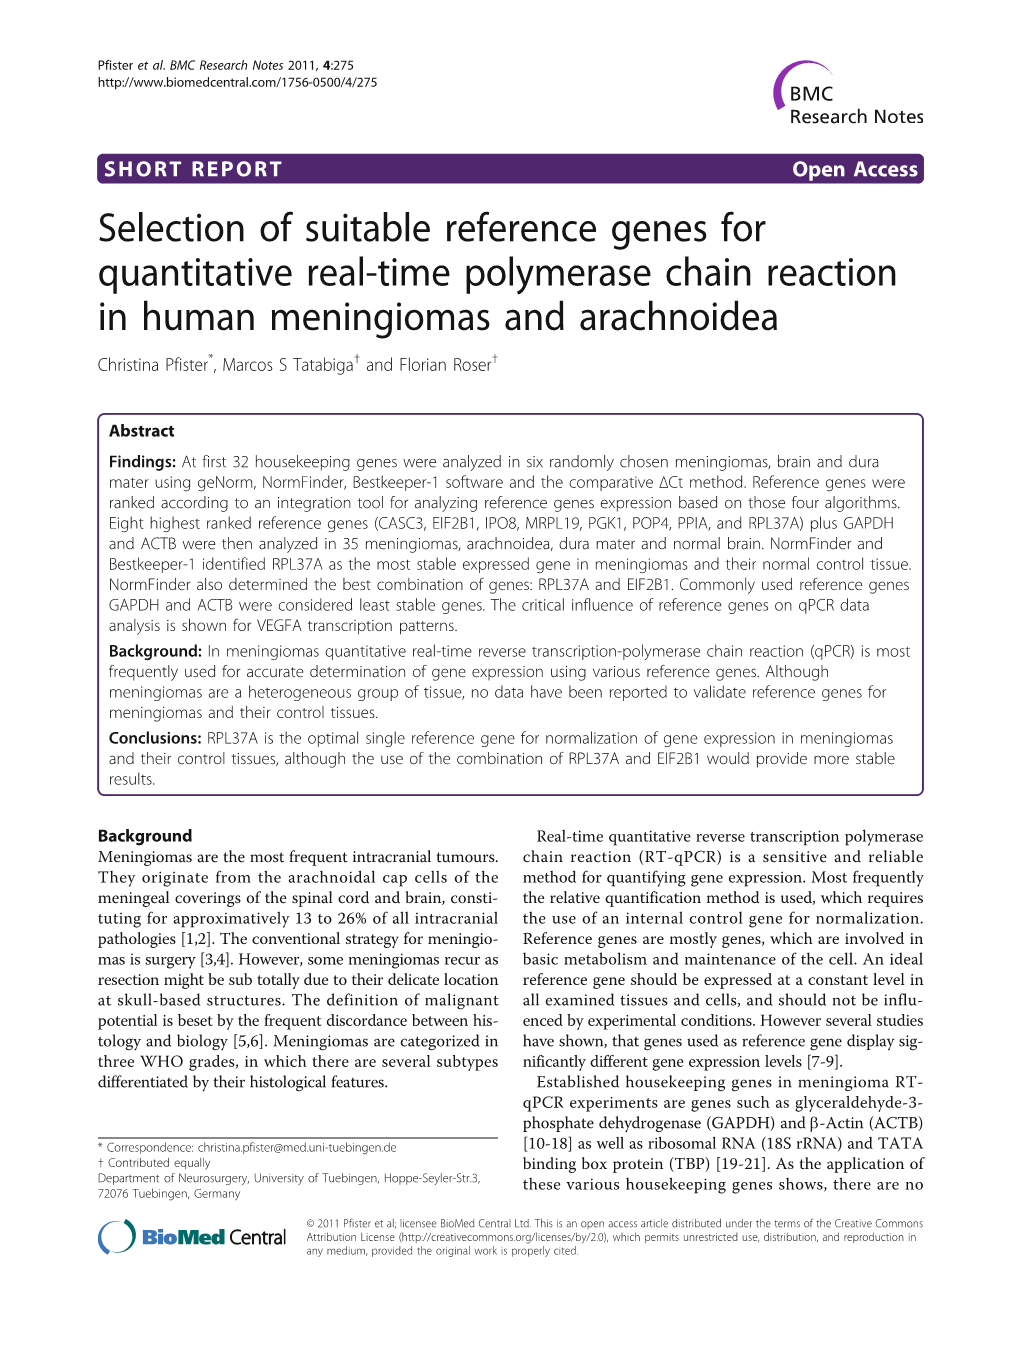 Selection of Suitable Reference Genes for Quantitative Real-Time